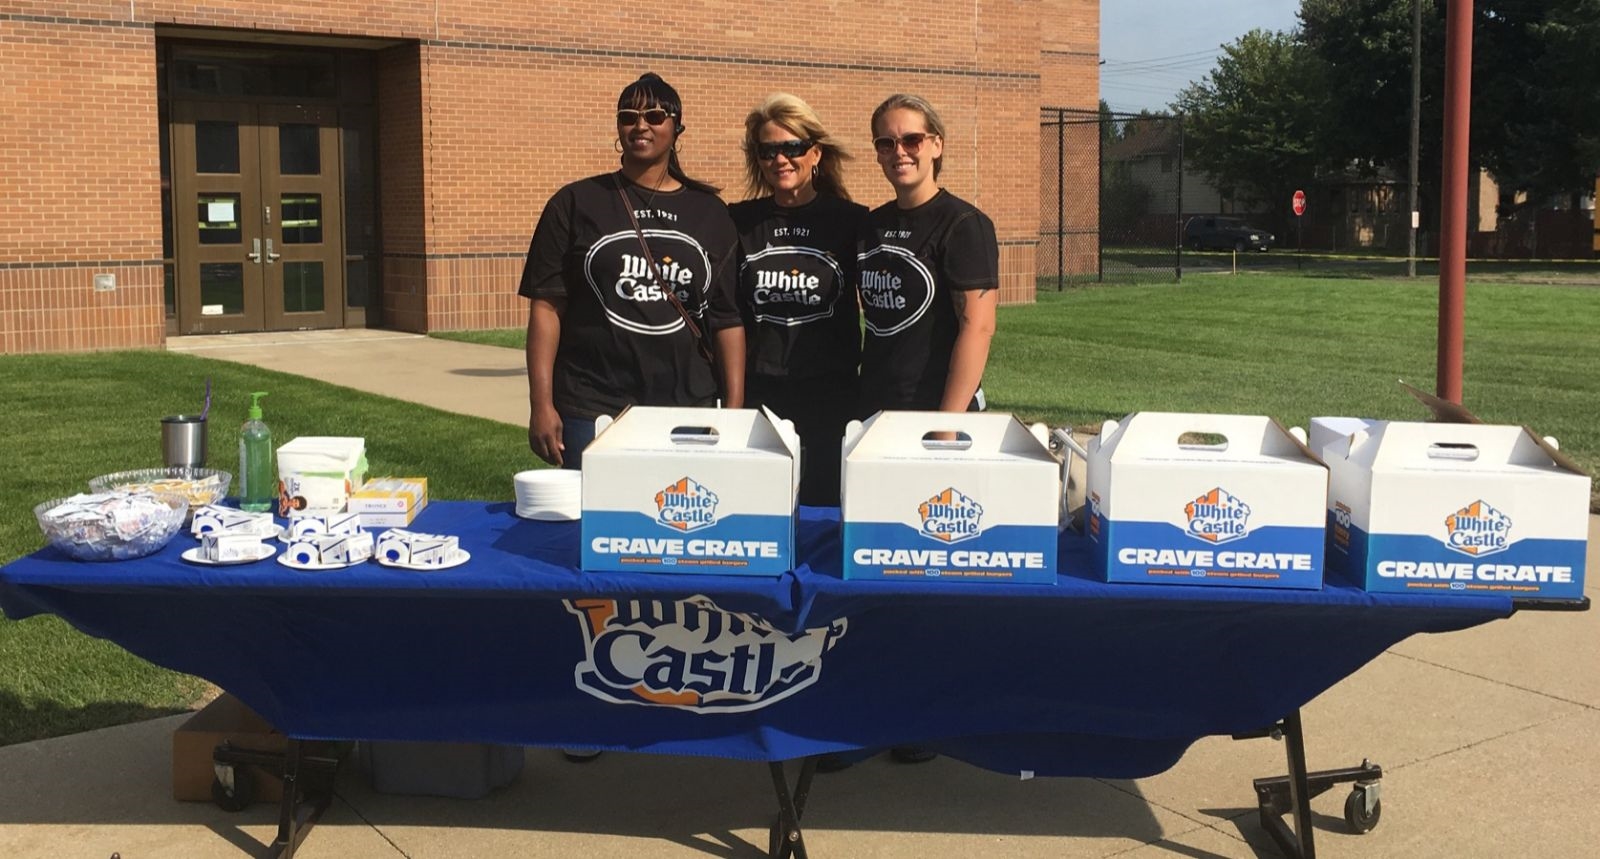 White Castle supports our community. #Castleshares